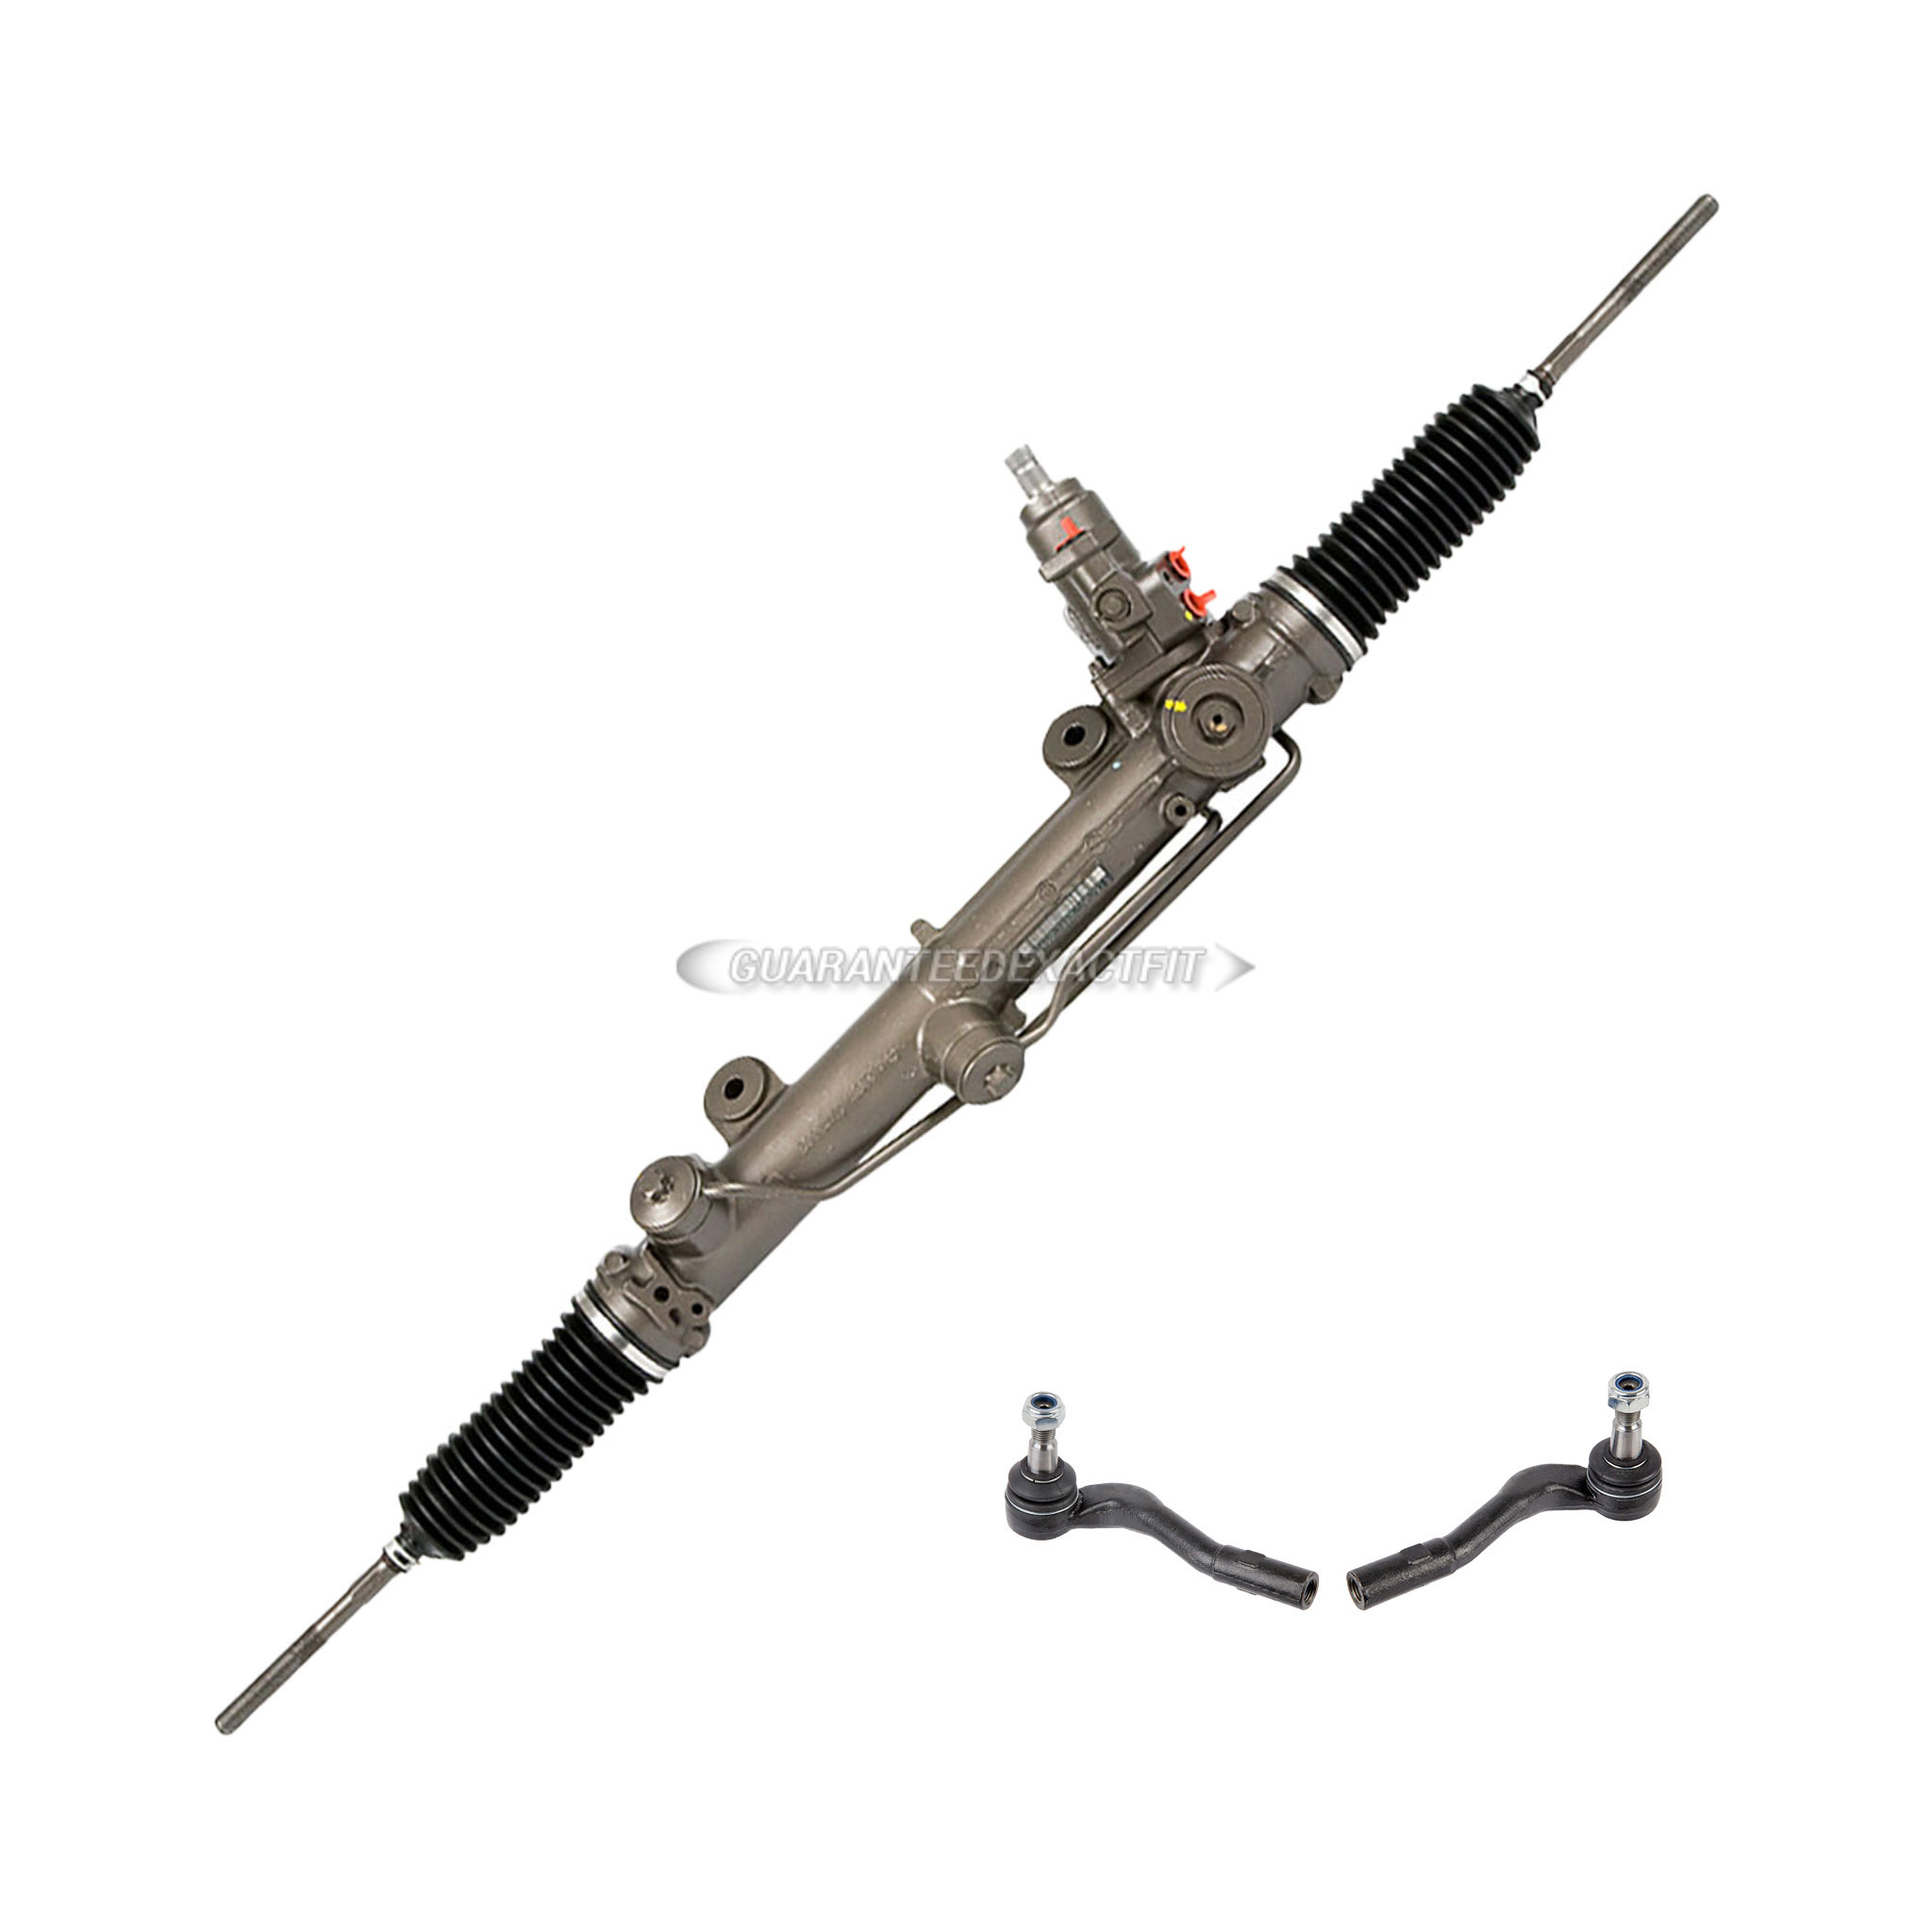  Mercedes Benz clk500 rack and pinion and outer tie rod kit 